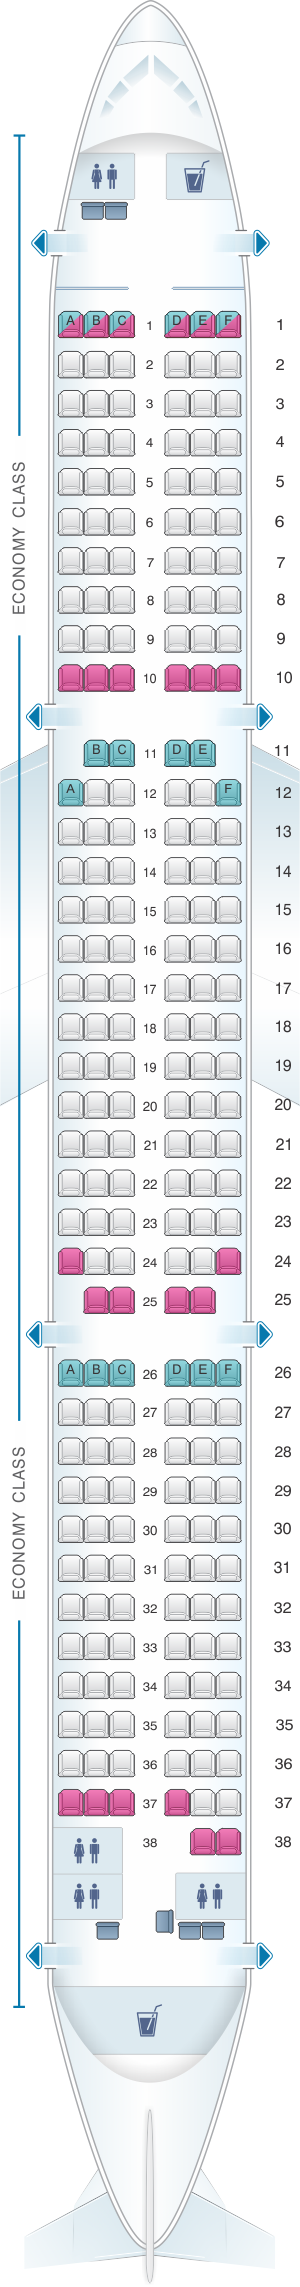 Seat map for Monarch Airlines Airbus A321 200